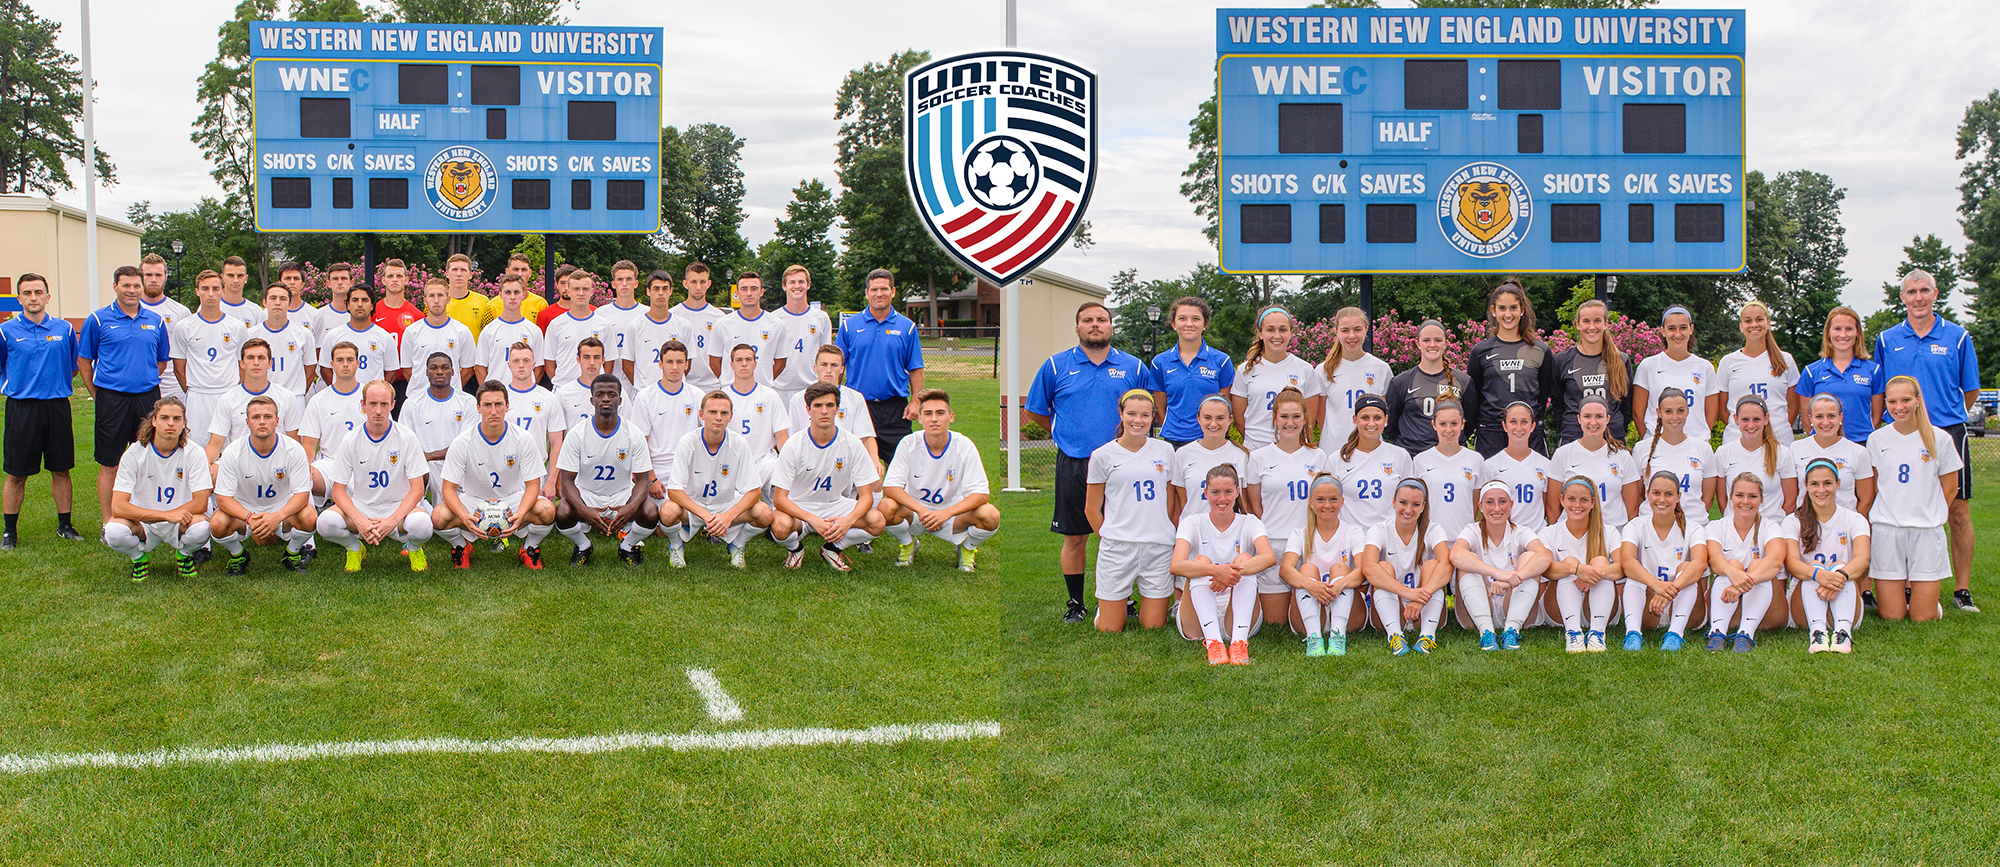 Western New England Men’s & Women’s Soccer Teams Earn Academic Awards From United Soccer Coaches